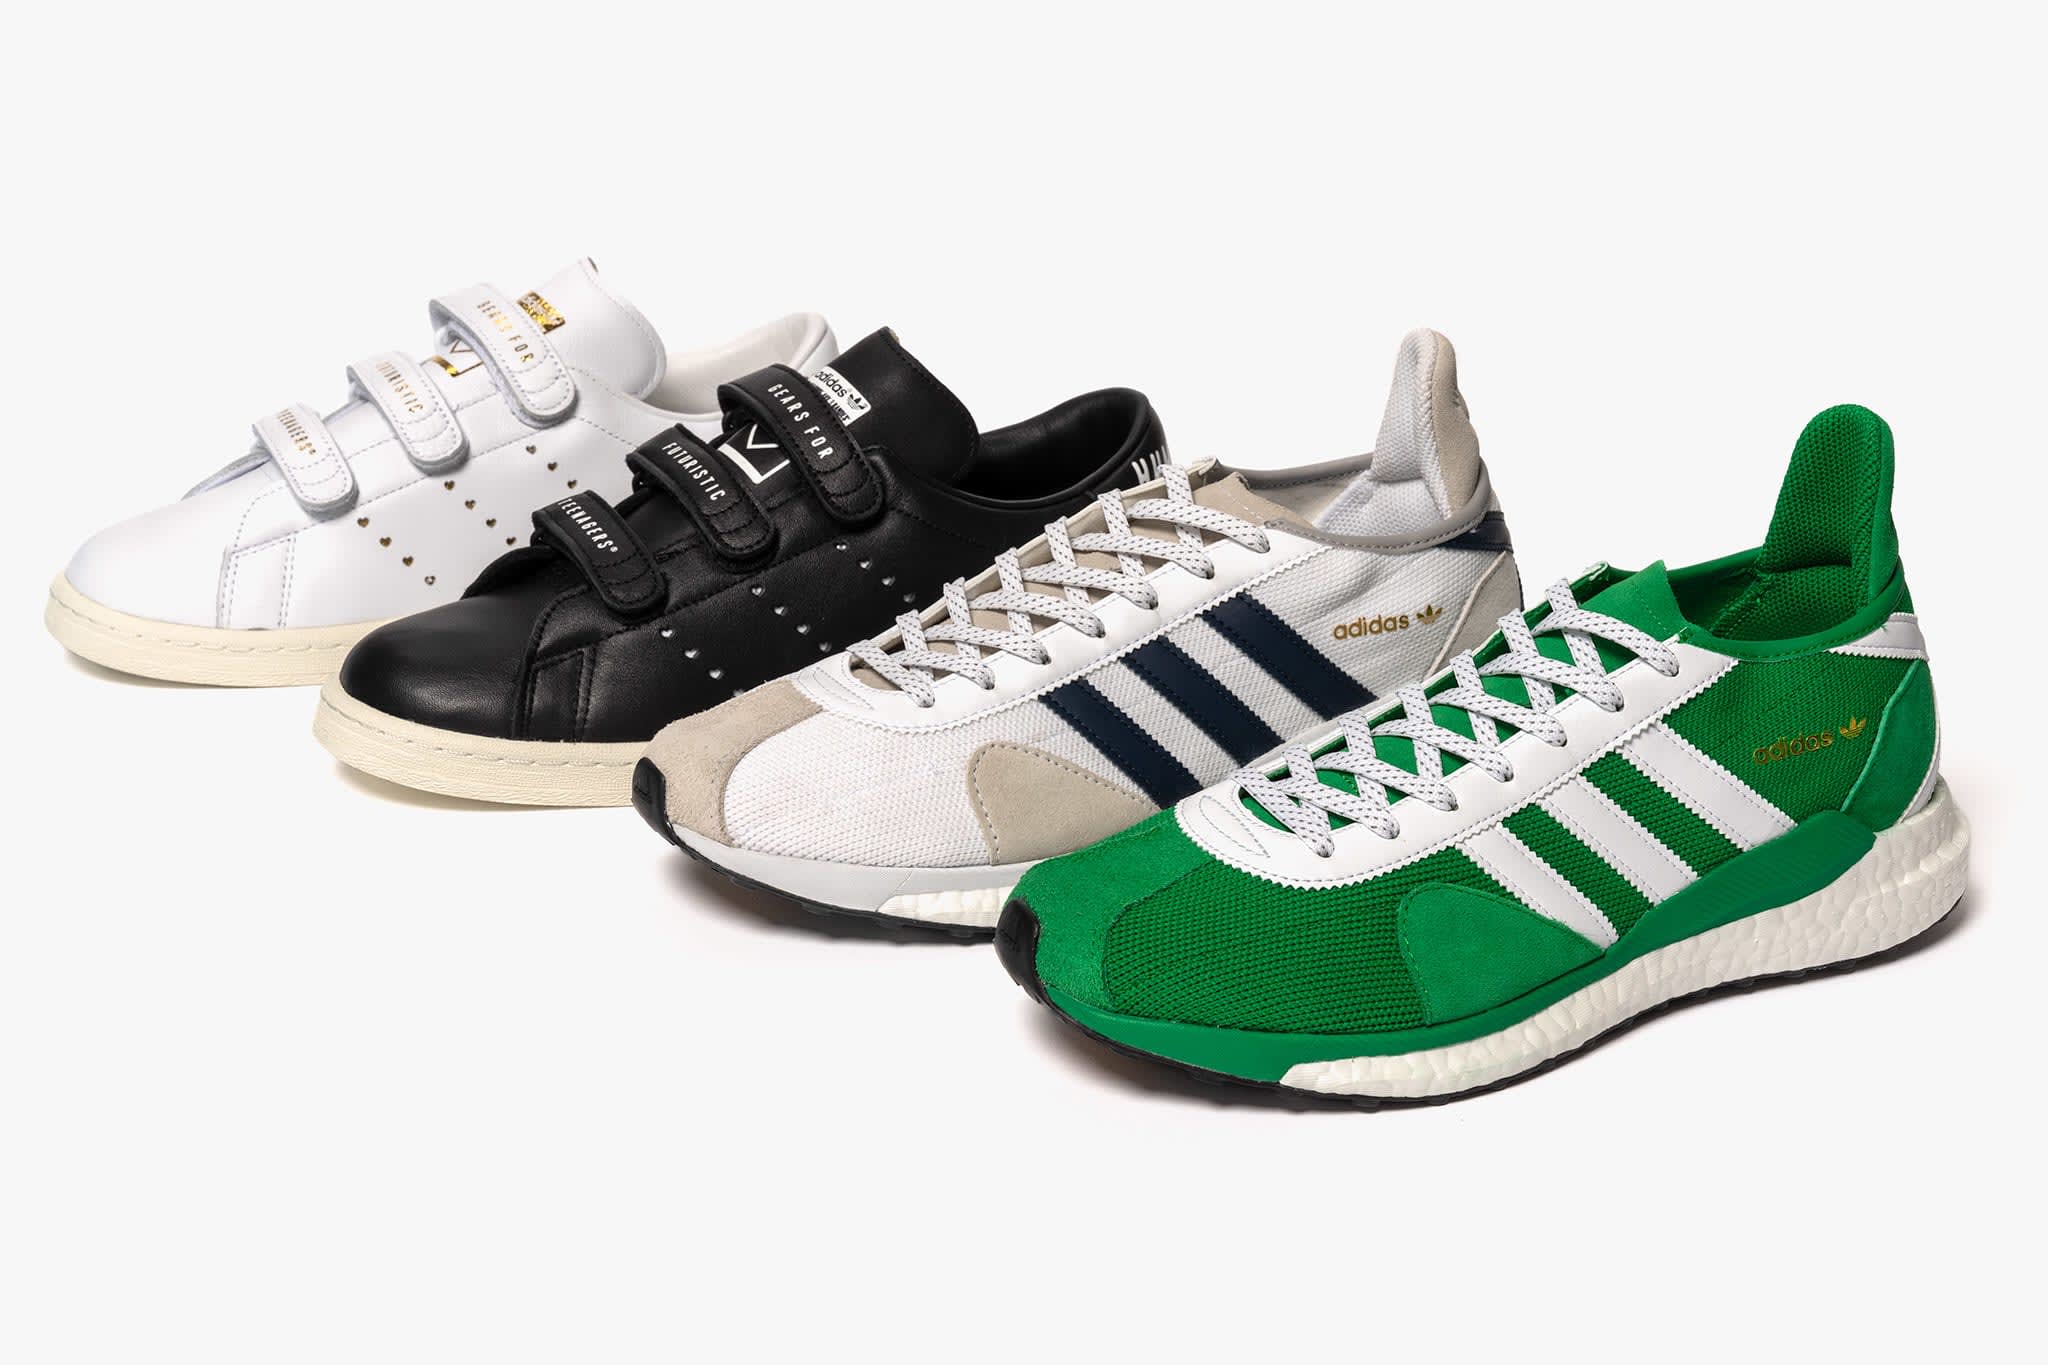 adidas Consortium x Human Made FW20 | Release Date: 09.25.20 | HAVEN